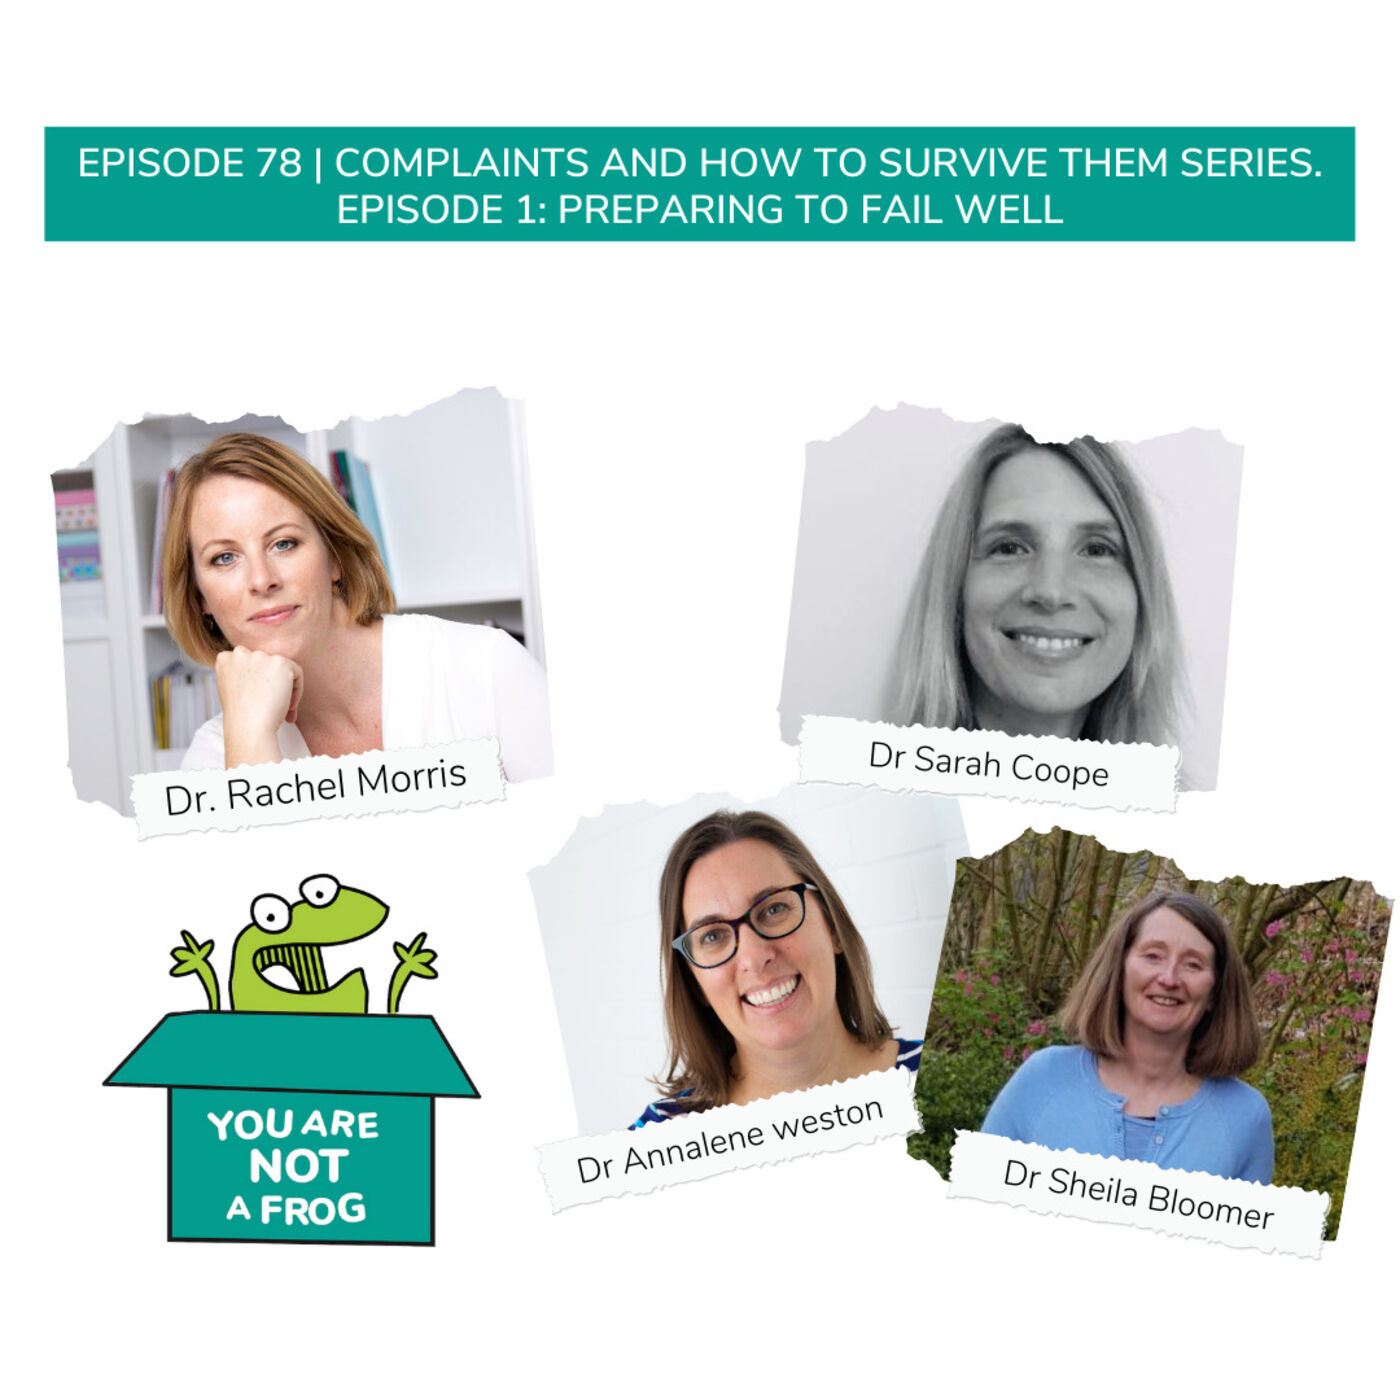 Complaints and How to Survive Them E1: Preparing to Fail Well with Drs Sarah Coope, Annalene Weston and Sheila Bloomer